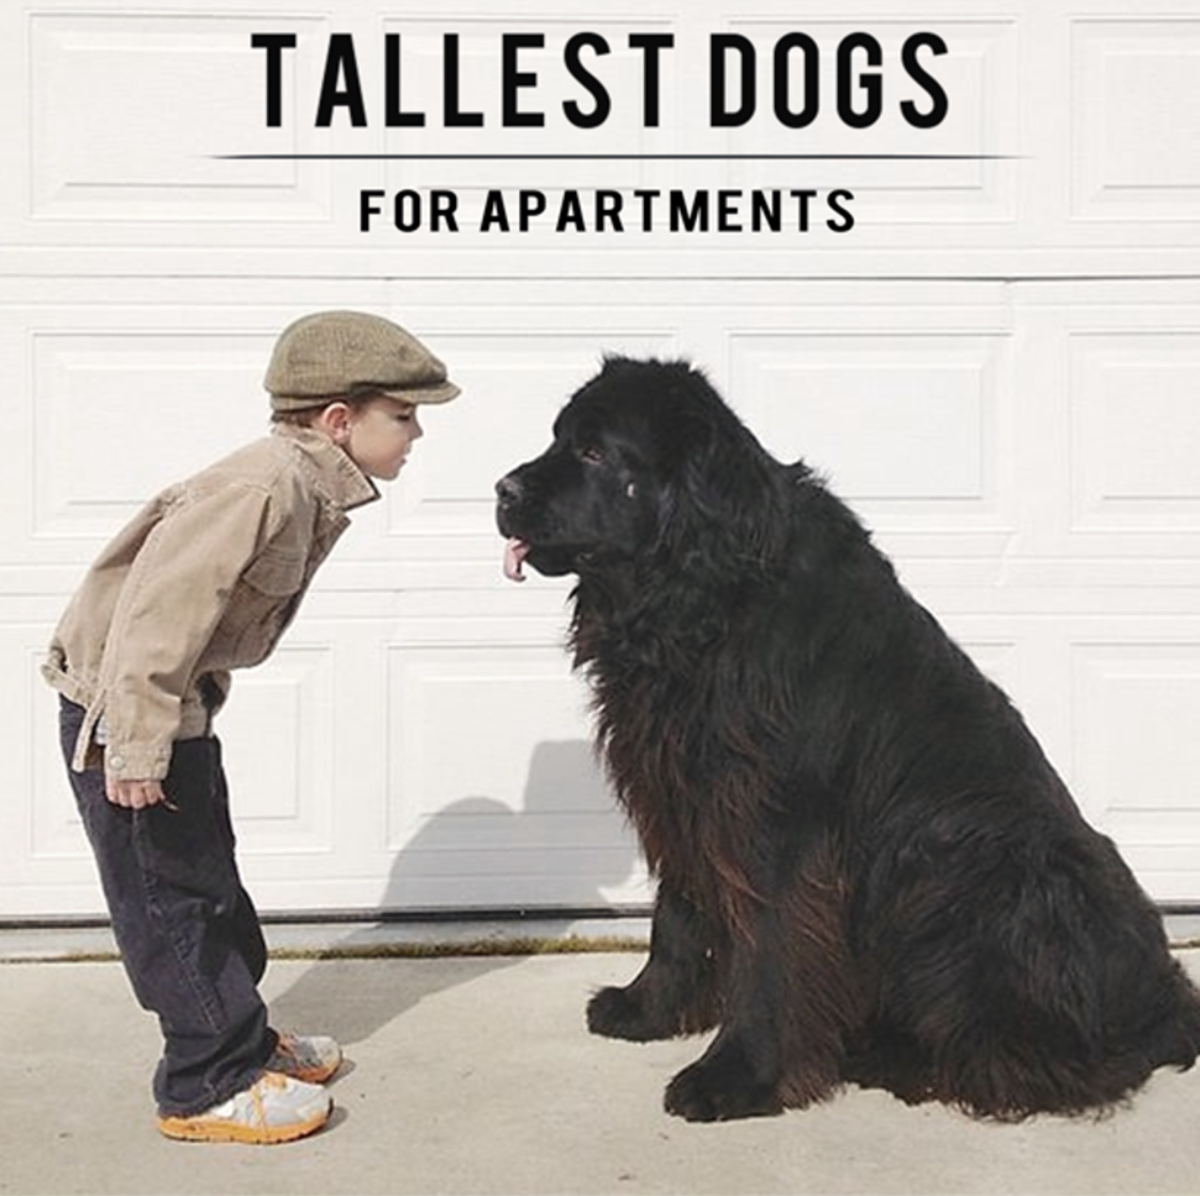 11 Tallest Dogs For Apartments